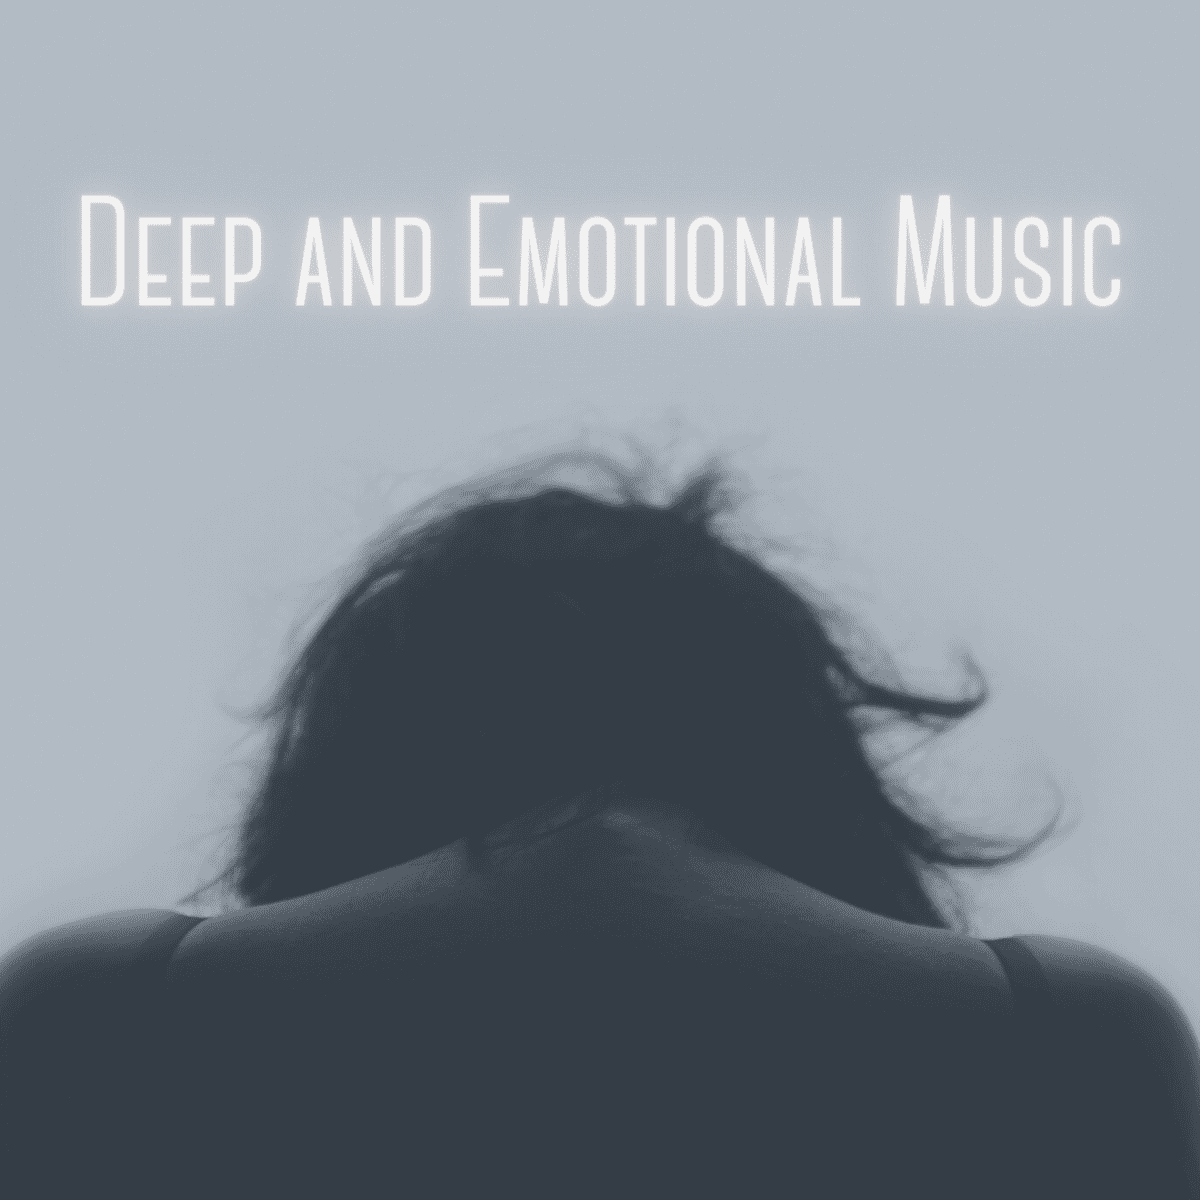 34 Beautiful Emotional Songs To Be Sad Reflective Depressed And Melancholy To Spinditty